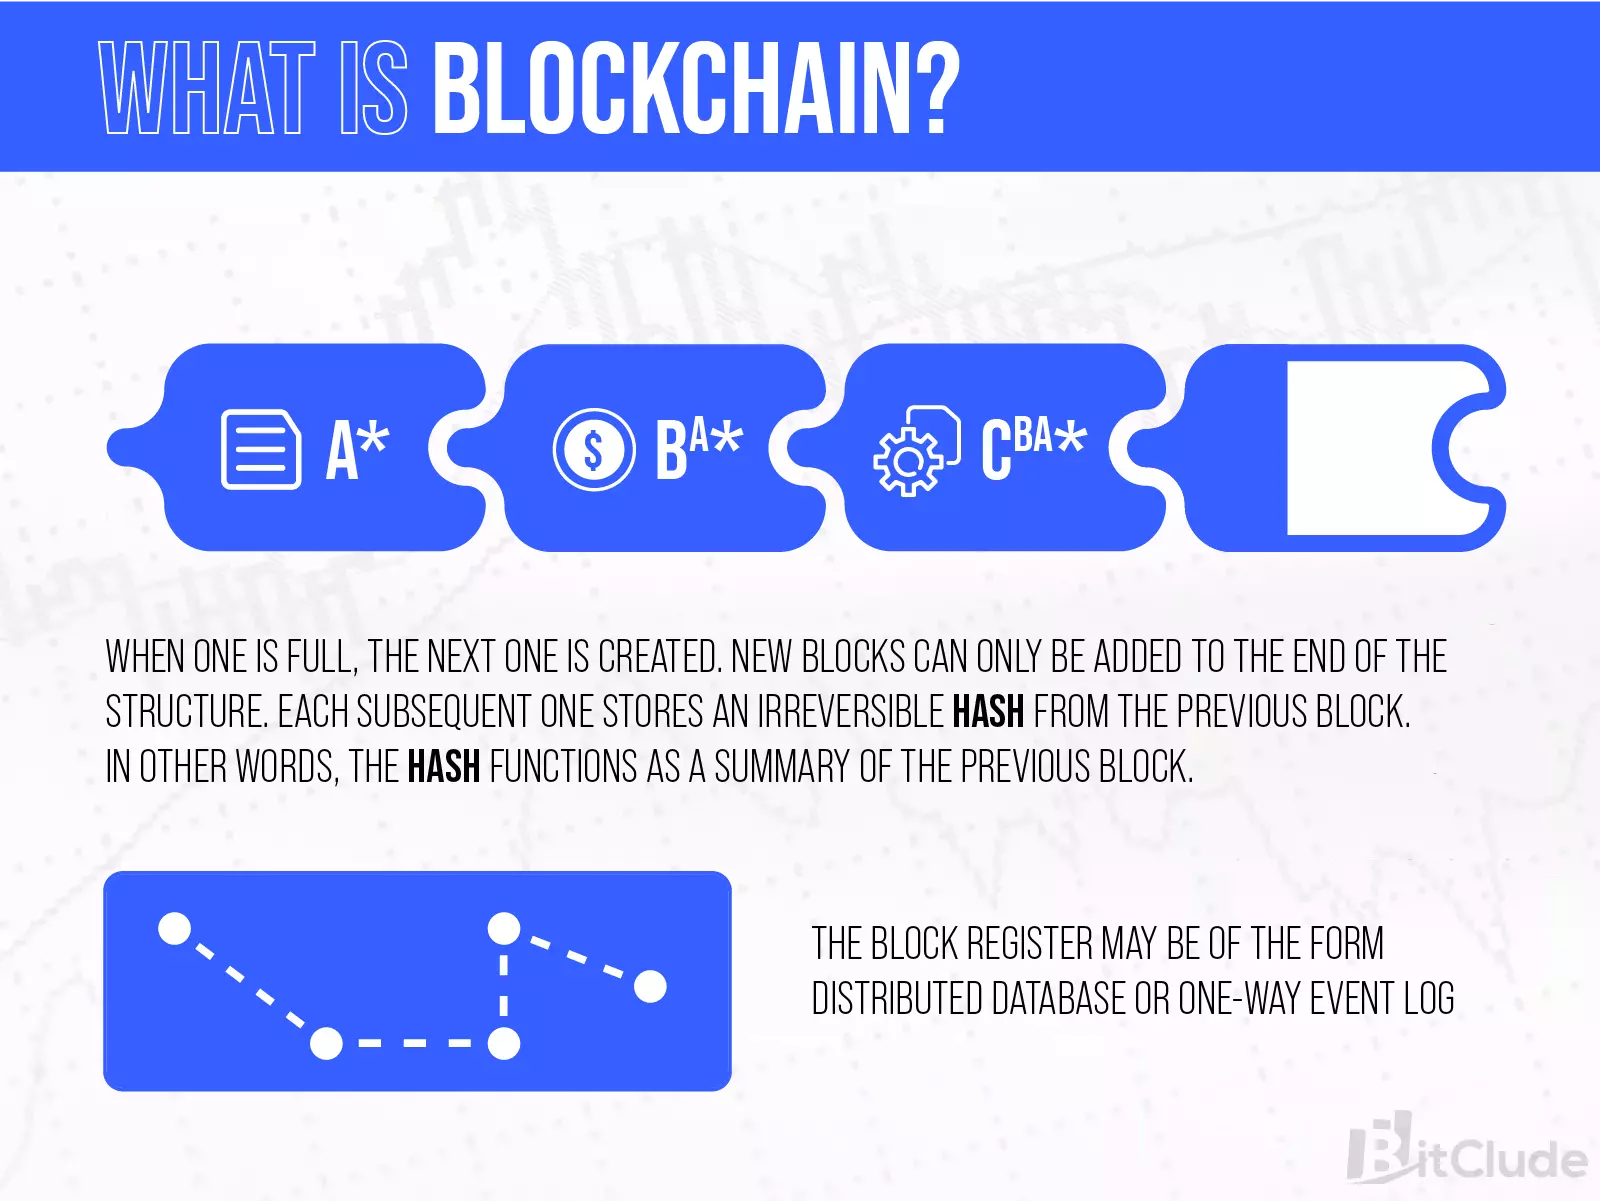 What is blockchain? Blockchain is a register of blocks containing information about transactions.